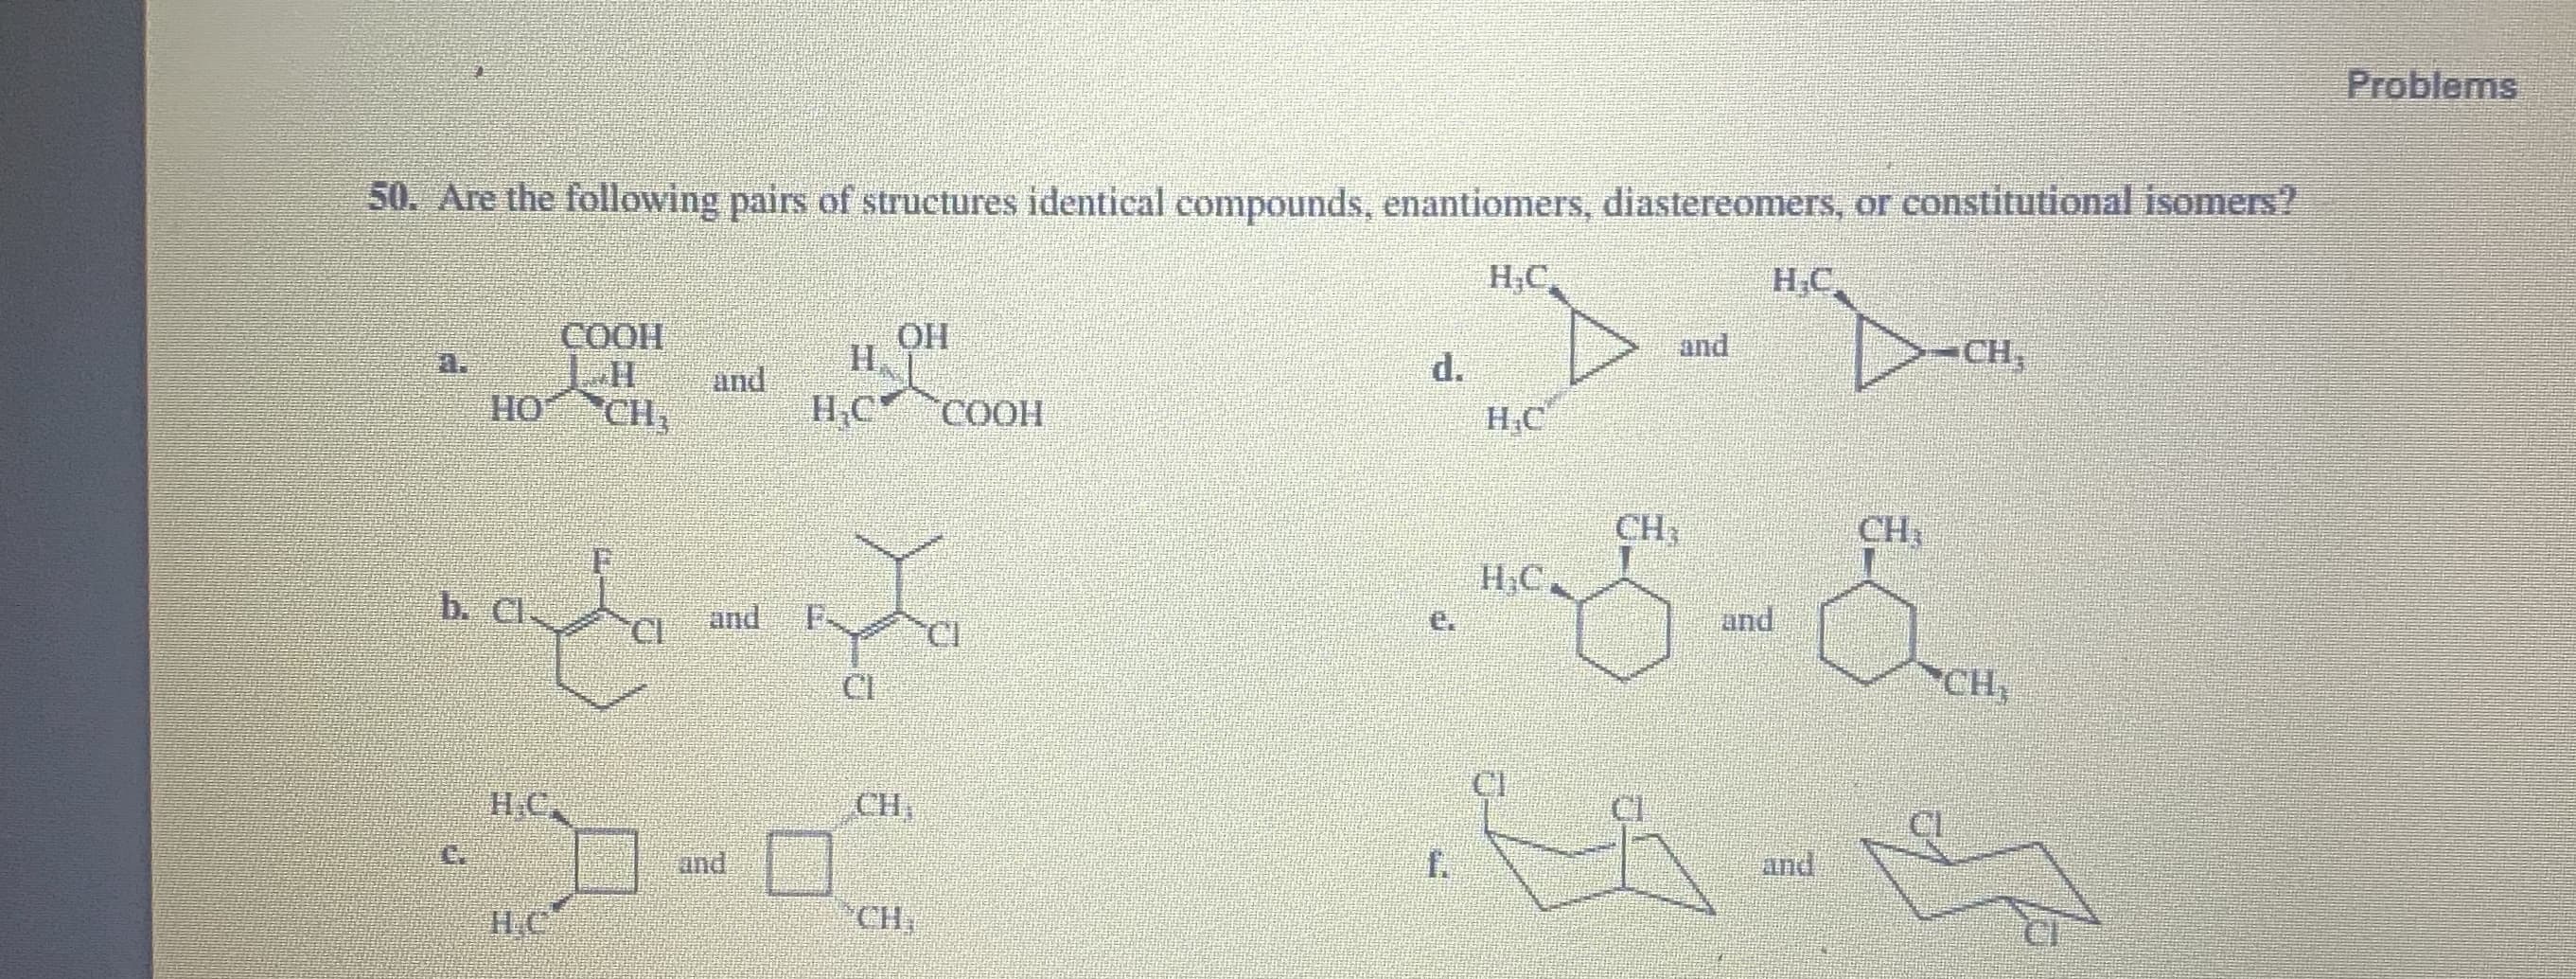 Are the following pairs of structures identical compounds, enantiomers, diastereomers, or constitutional isomers?
H;C.
H;C
СООН
ОН
H.
-CH,
and
a.
d.
and
H,C COOH
HO
CH,
H.C
CH
CH
F
b. Cl
H&C,
CI
and
F
e.
and
CI
CH,
CI
H.C
CH,
CI
and
f.
and
H.C
CH
